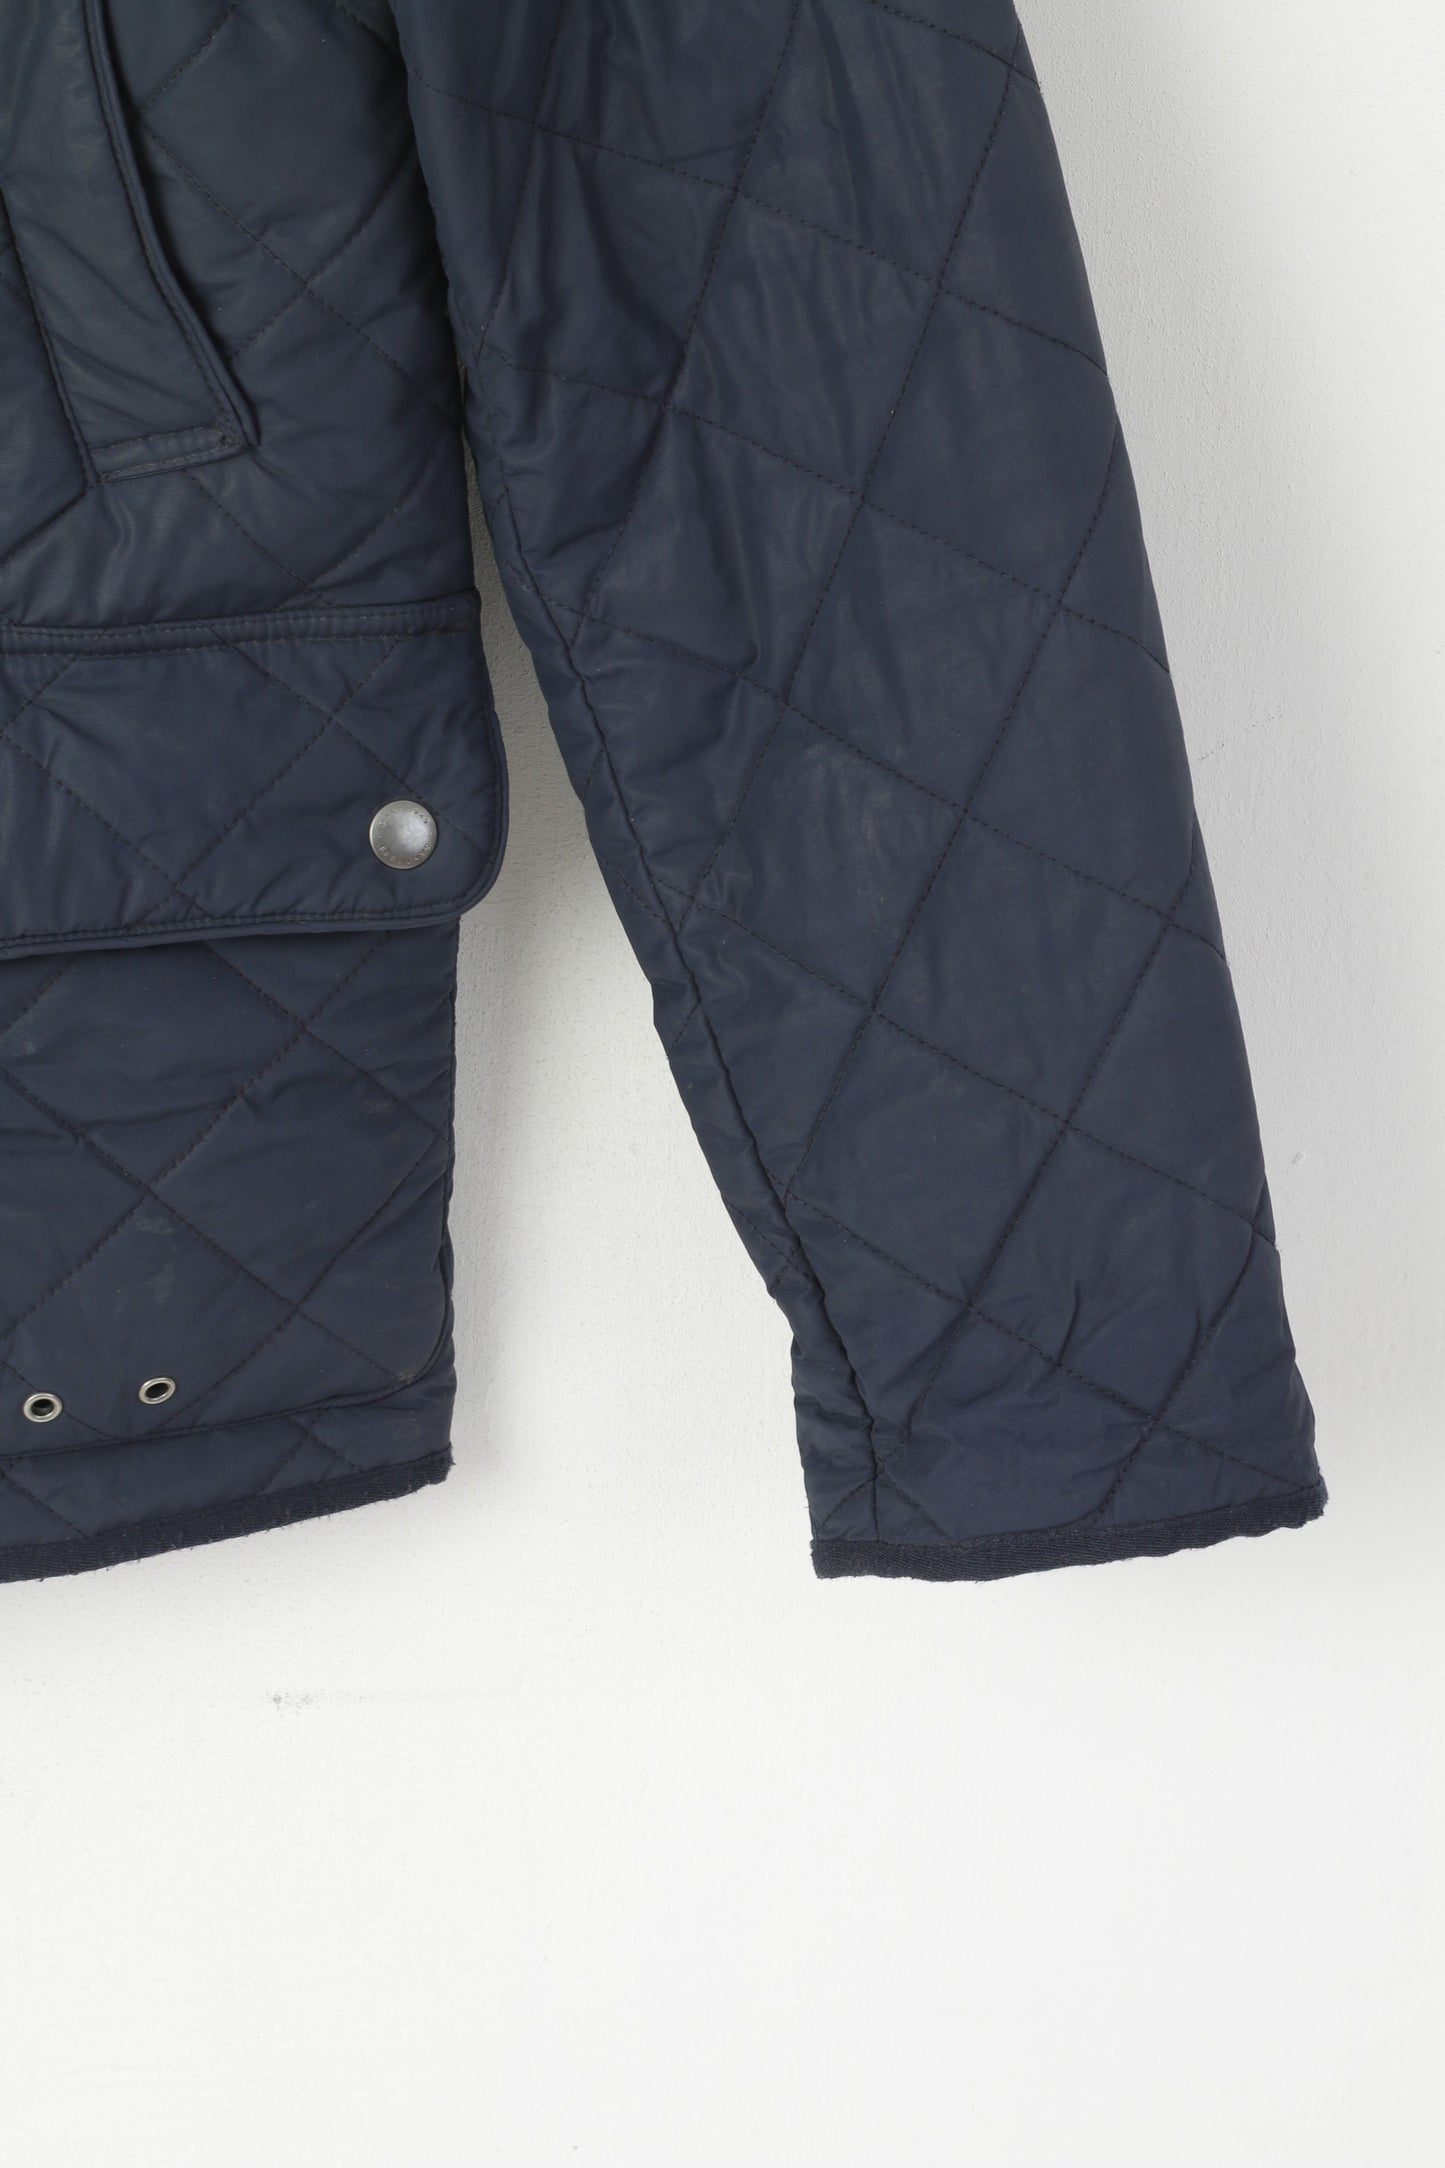 GANT The Cosy Duilter Men S Jacket Navy High Neck Quilted Snap Nylon Top